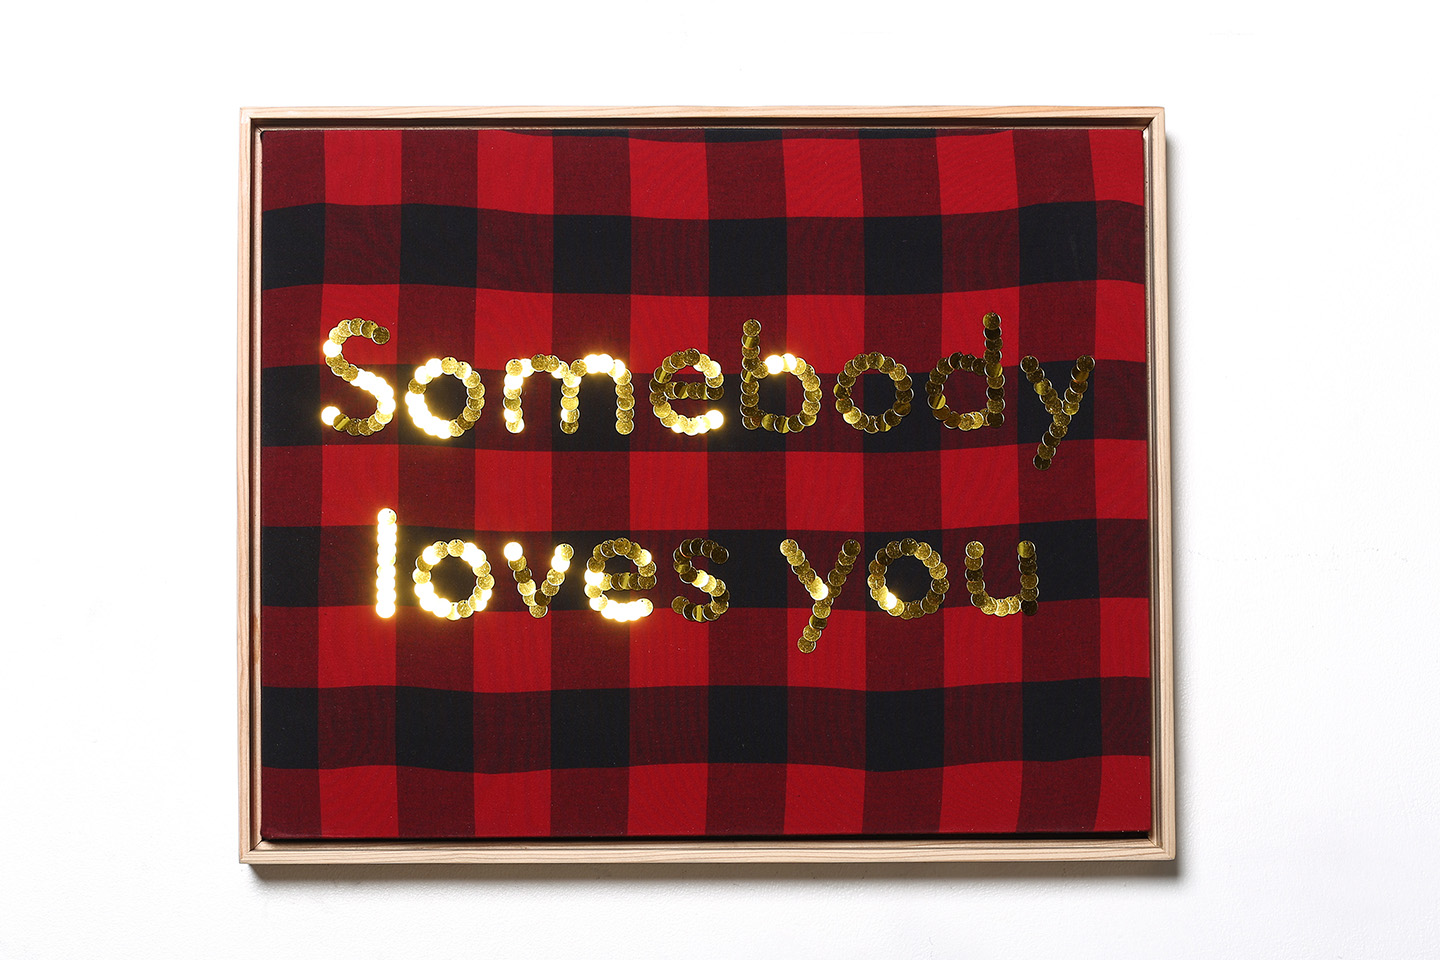   Somebody loves you  Sequins on buffalo check shirt in custom wooden frame 20" x 16" 2017   